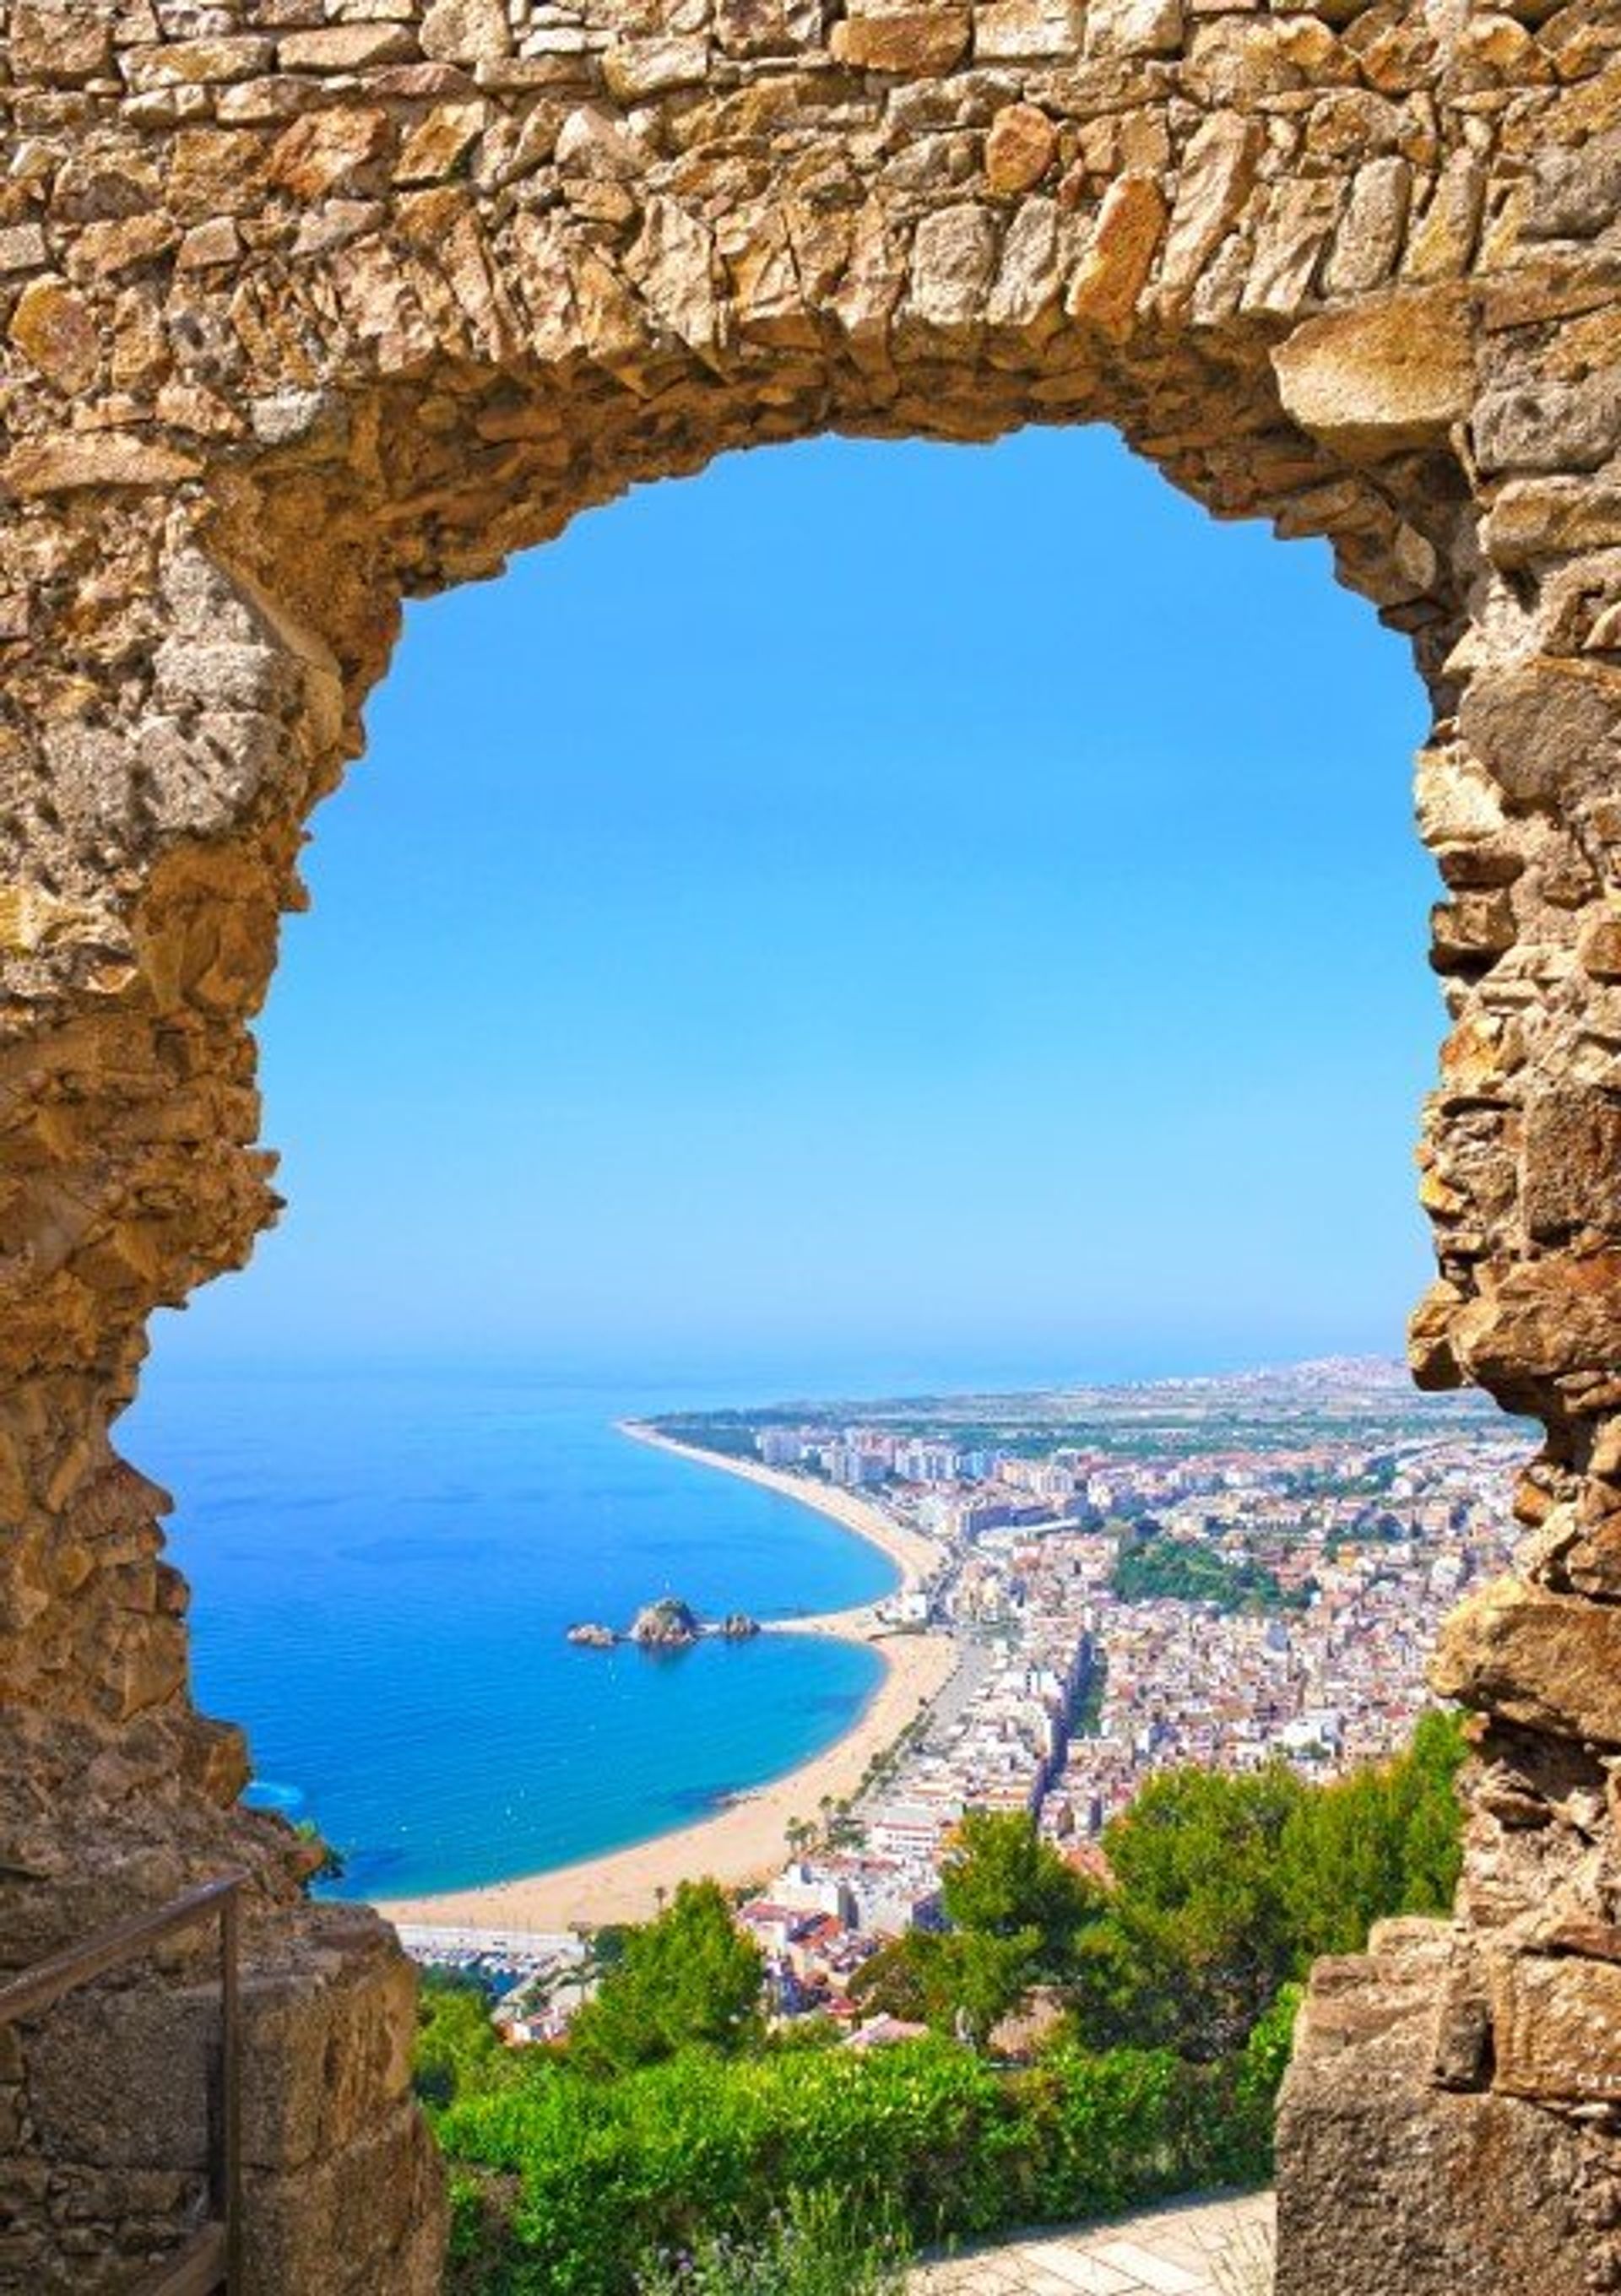 Beautiful Blanes is known as the gateway to the Costa Brava